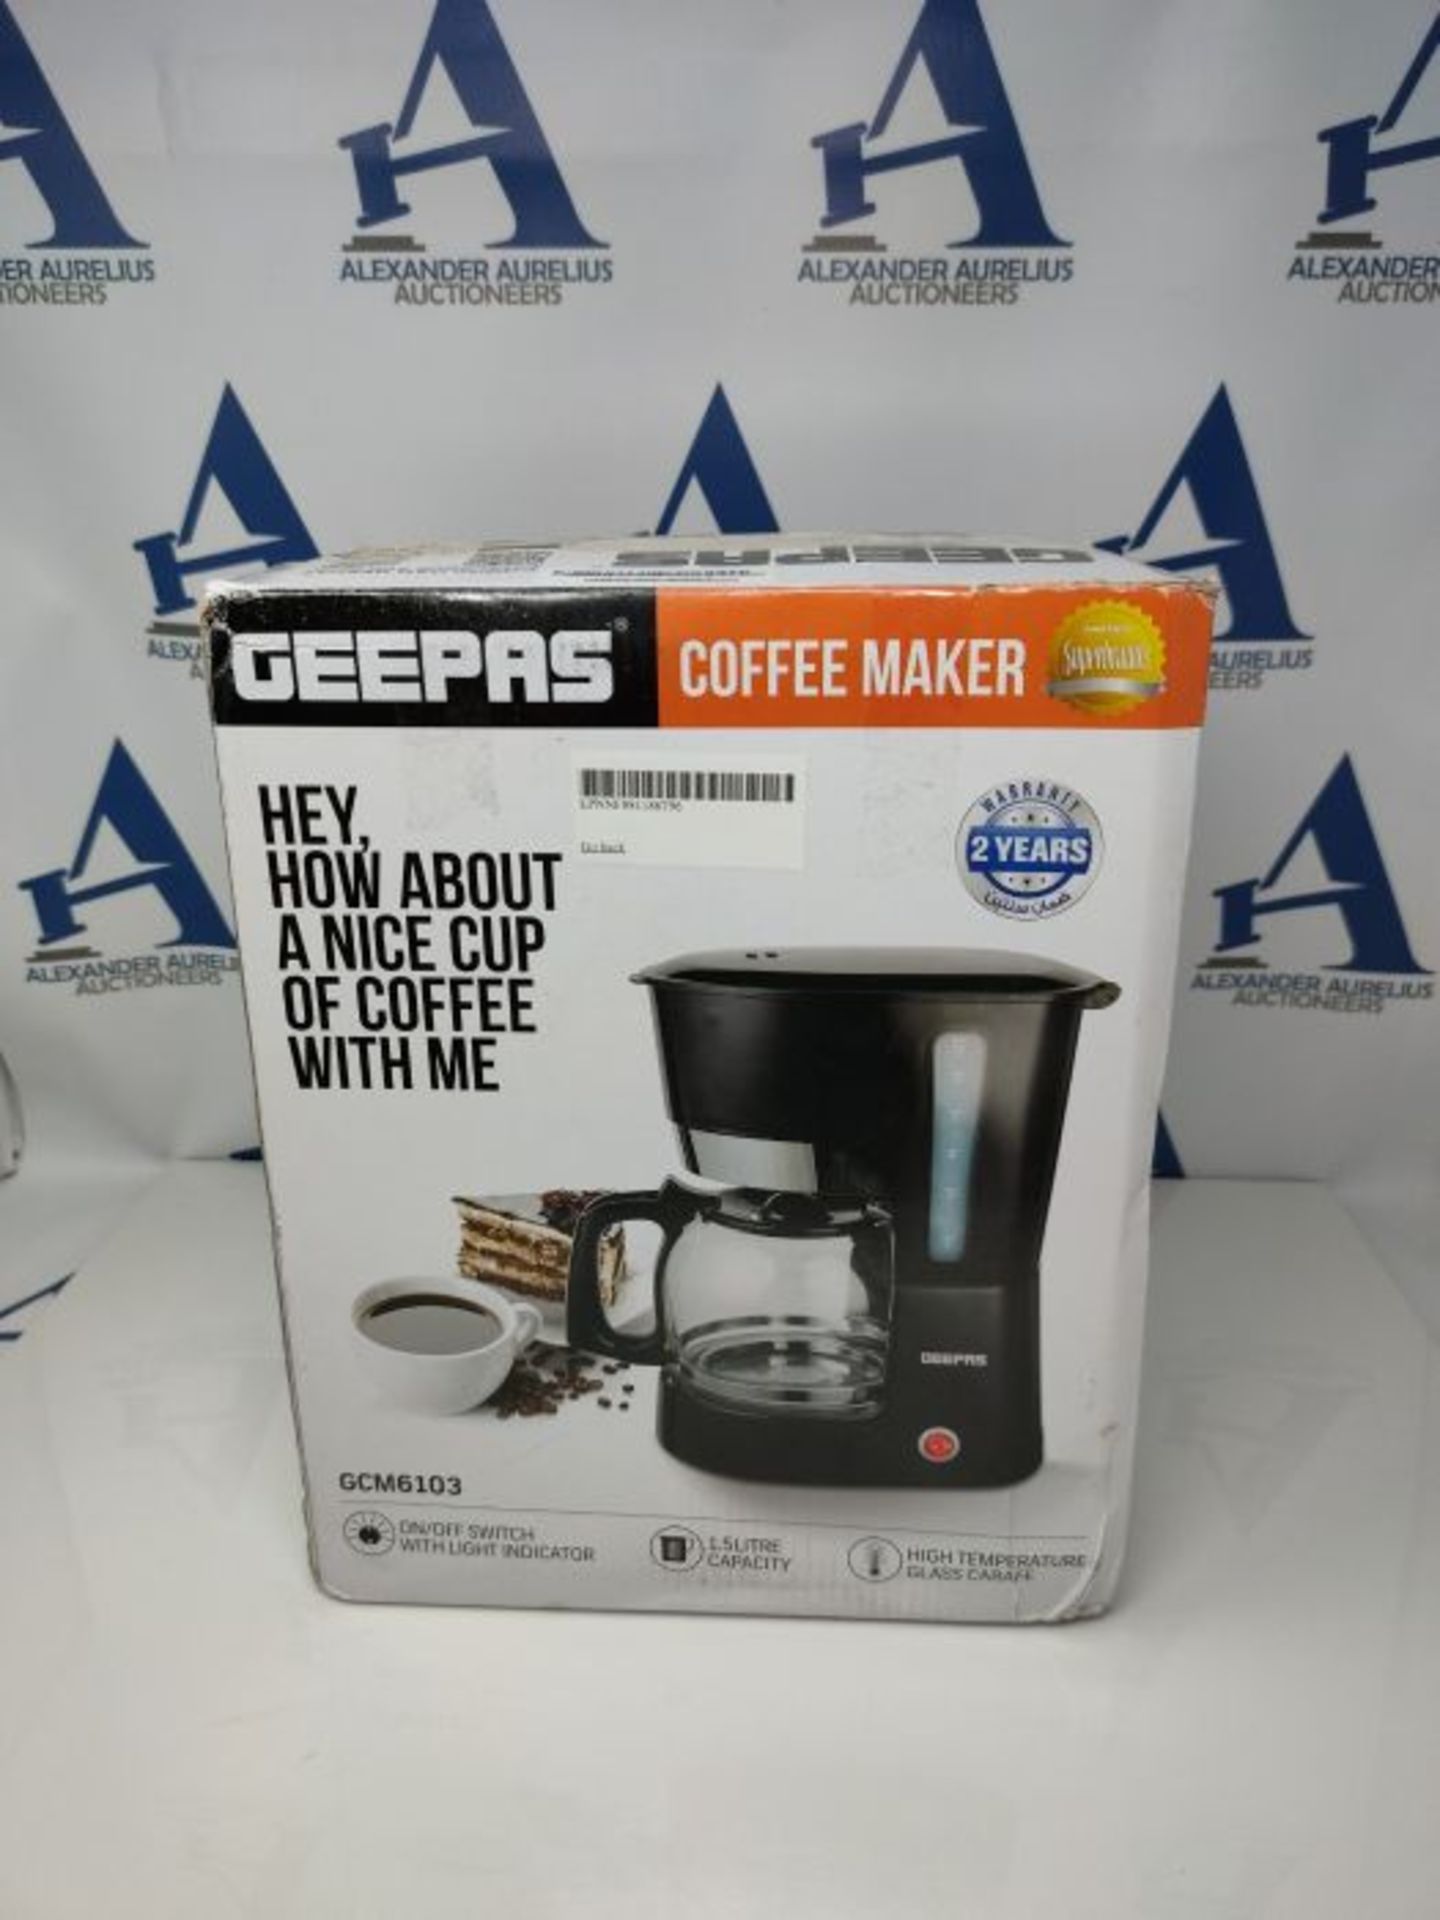 Geepas 1000W Filter Coffee Machine, 1.5L | Coffee Maker for Instant Coffee, Espresso, - Image 2 of 3